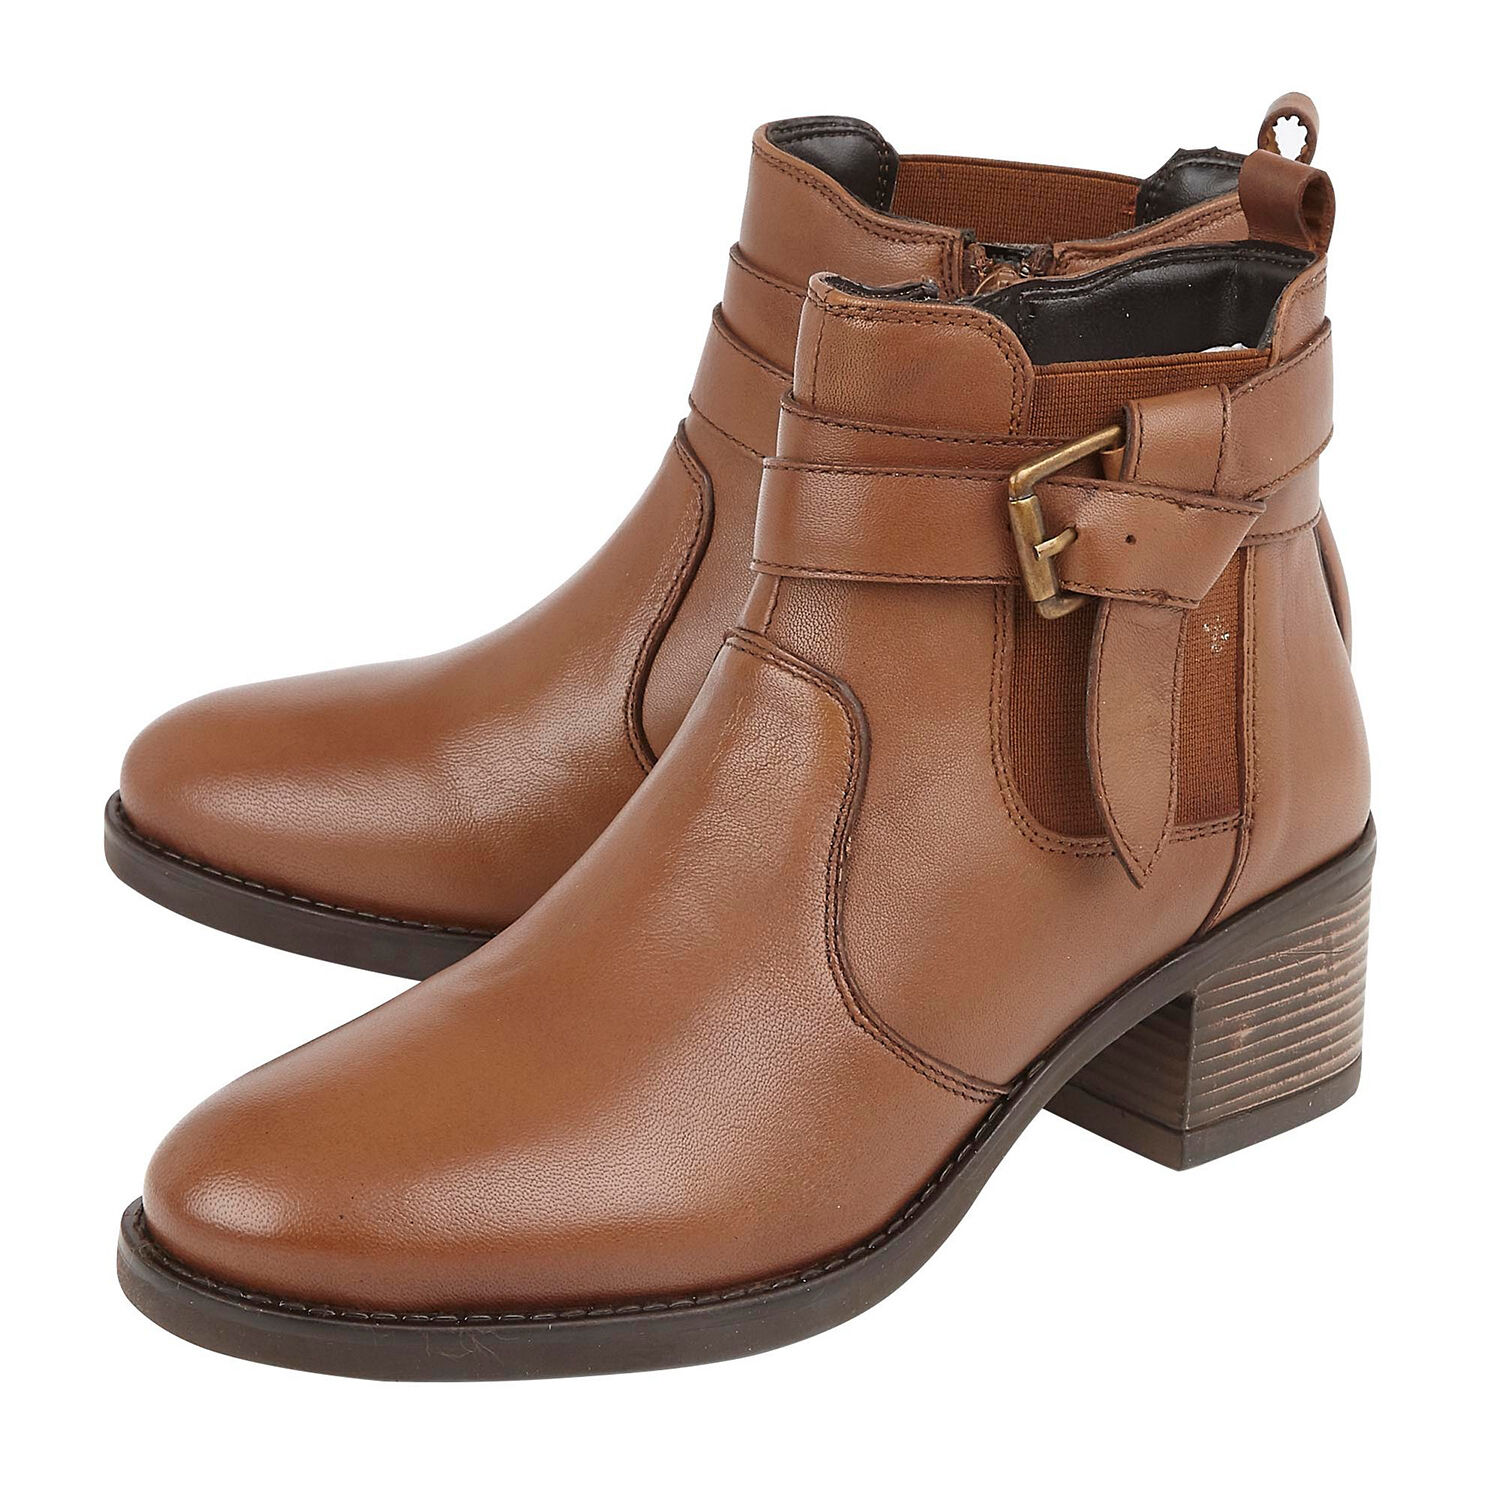 Lotus Janet Leather Ladies Ankle Boots 